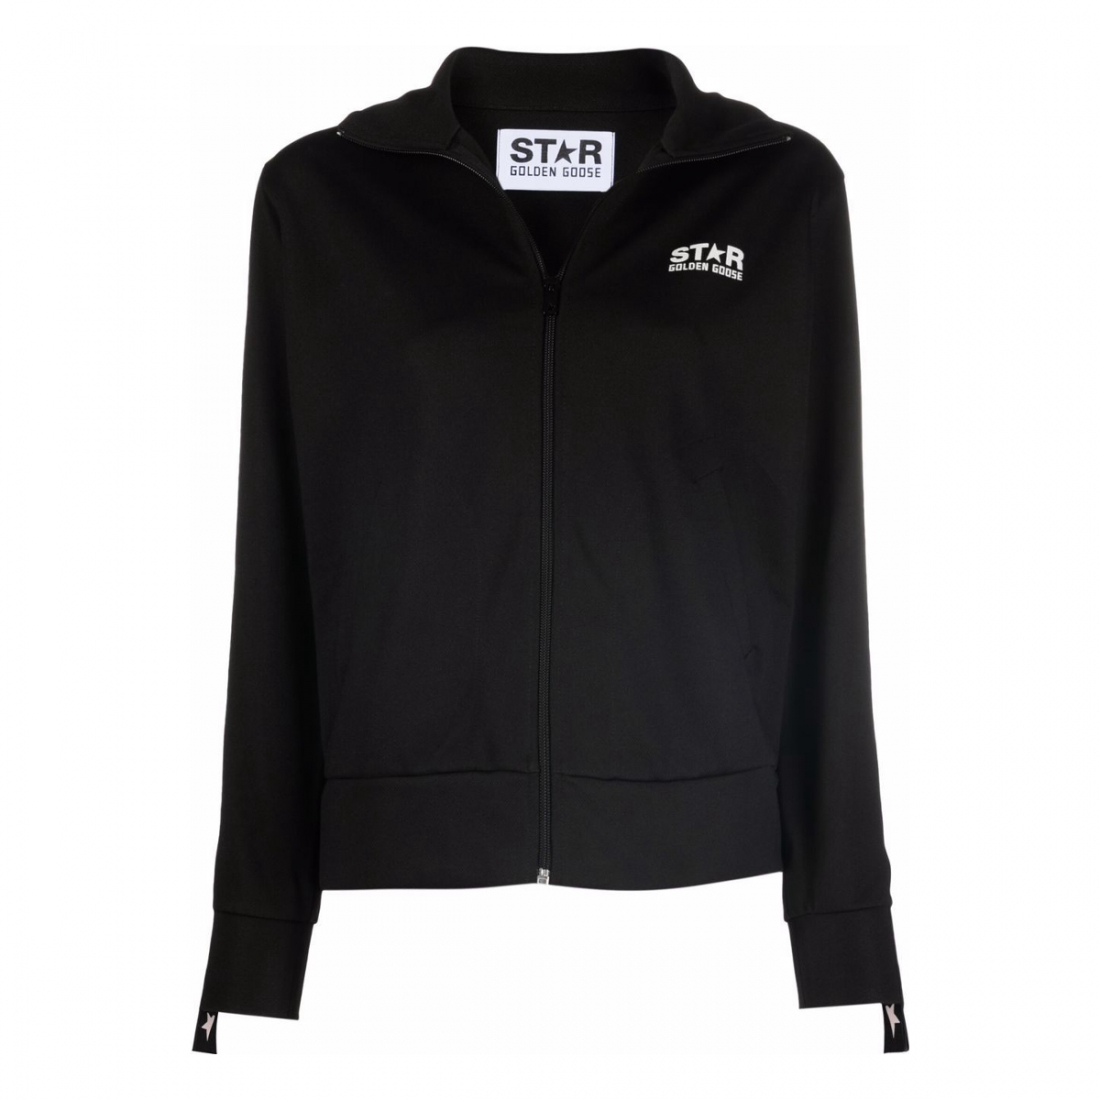 Women's 'Denise Star Collection' Track Jacket